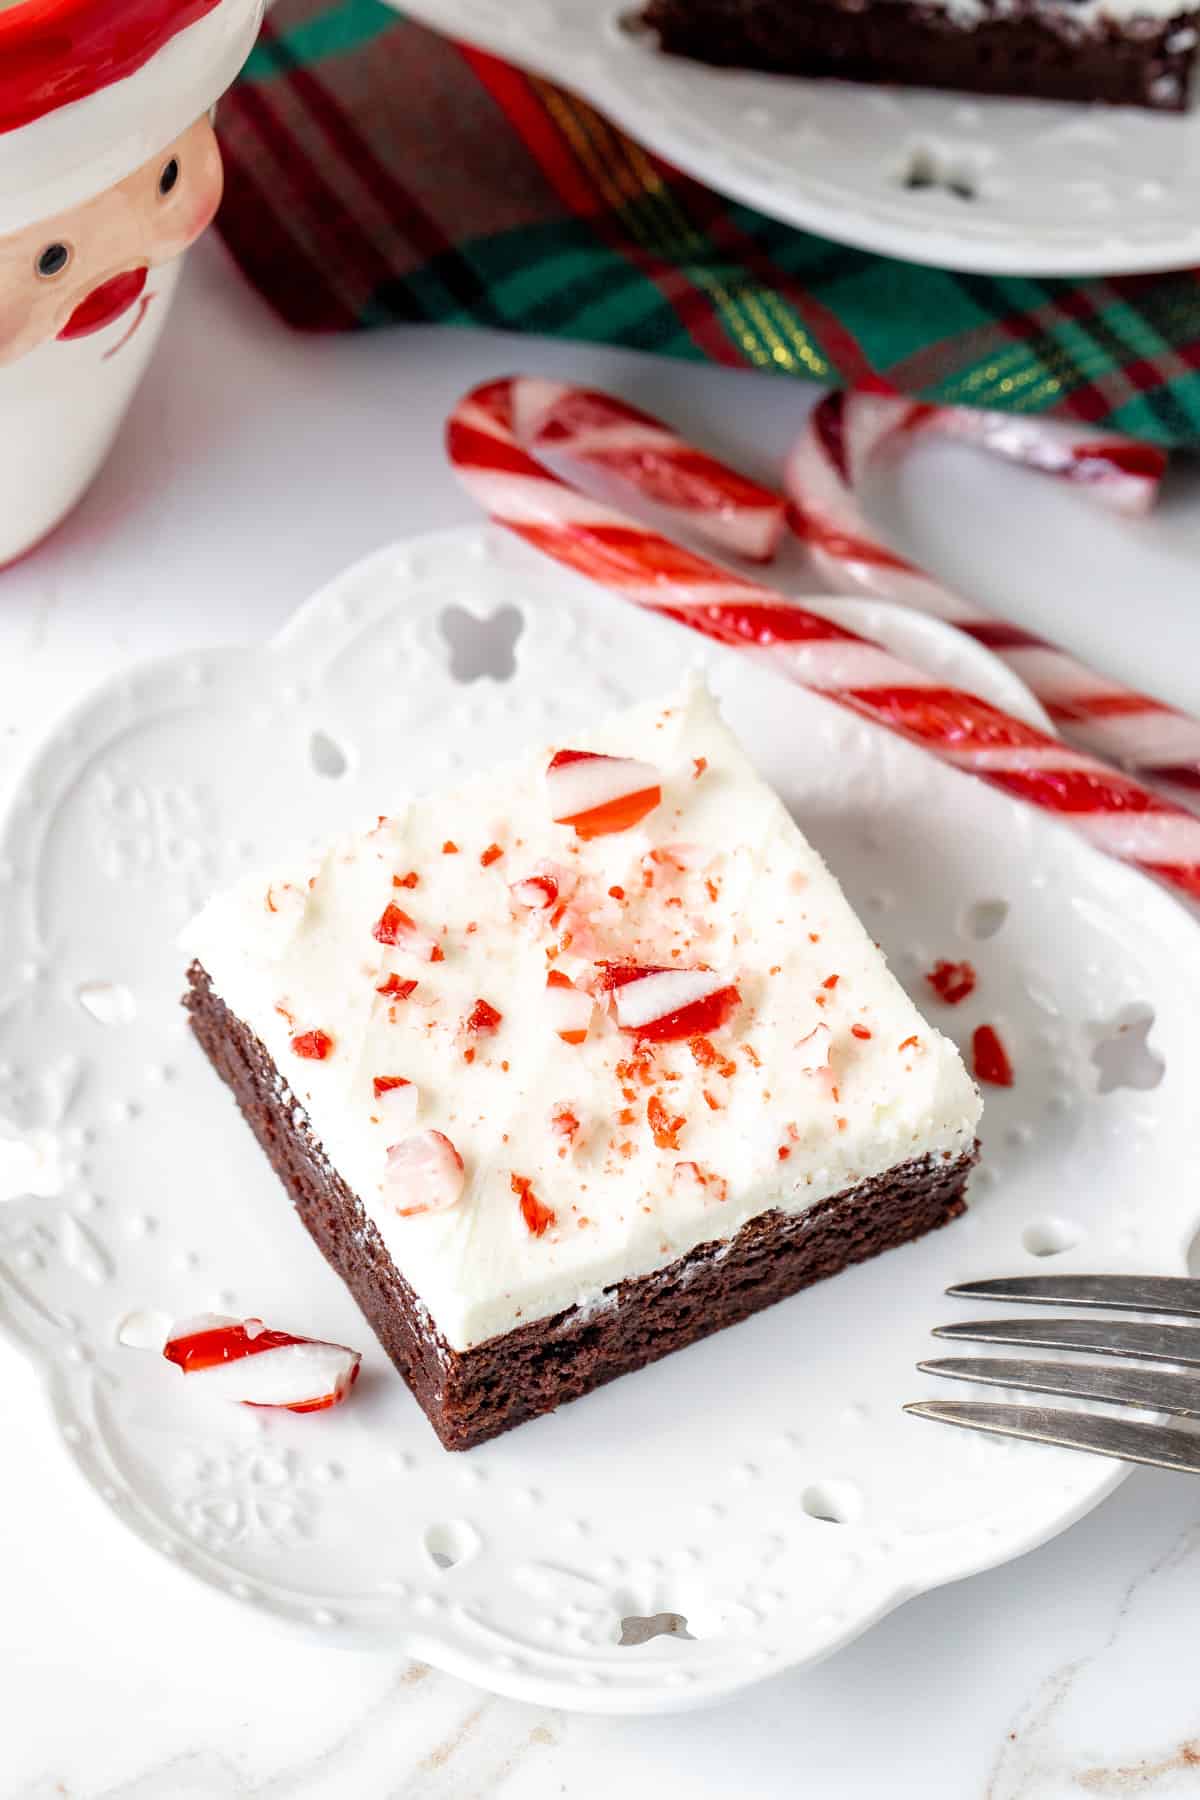 Brownie with white chocolate frosting and crushed candy canes on top